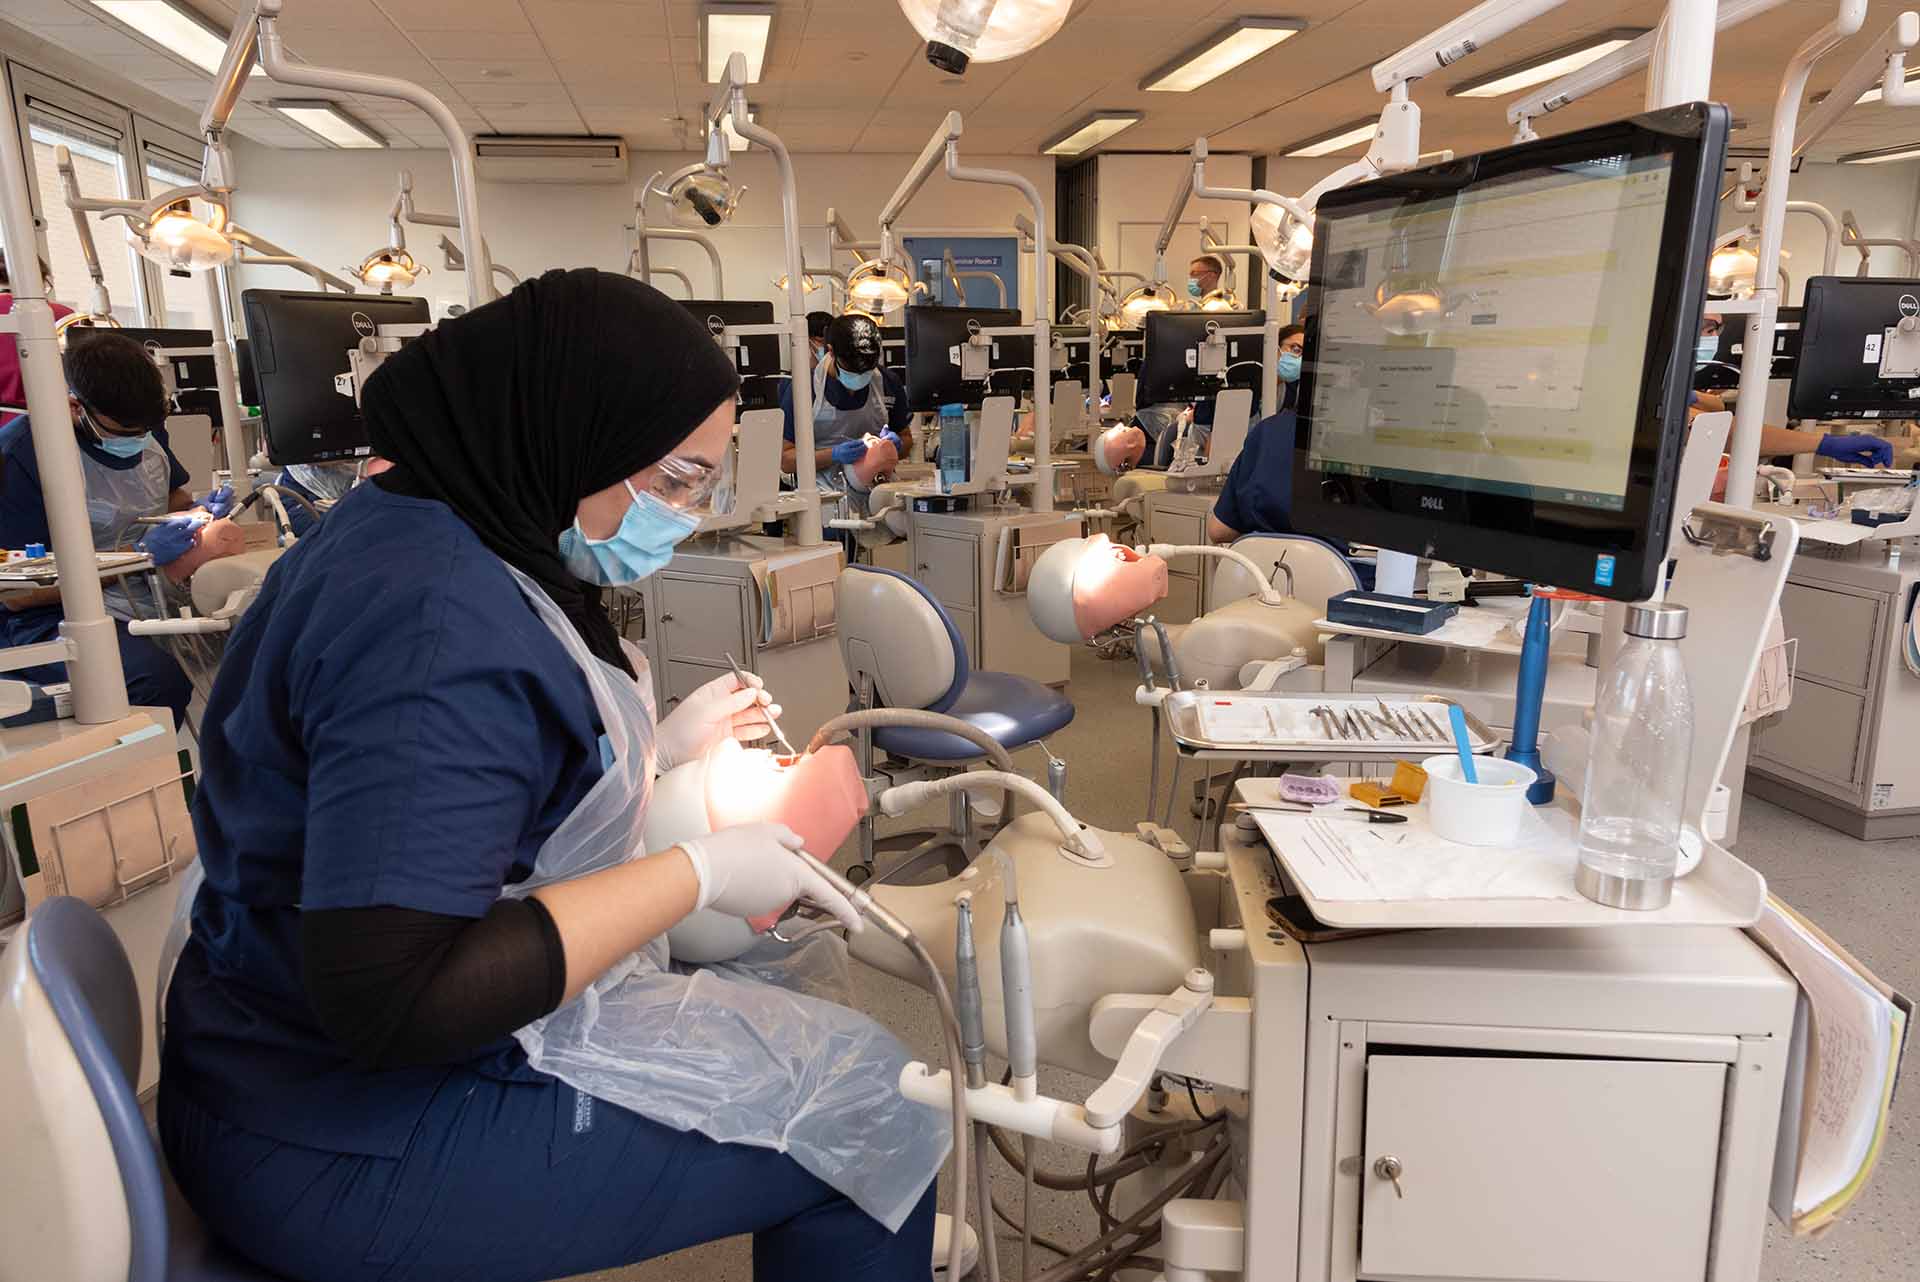 Dentistry student working on simulation patient